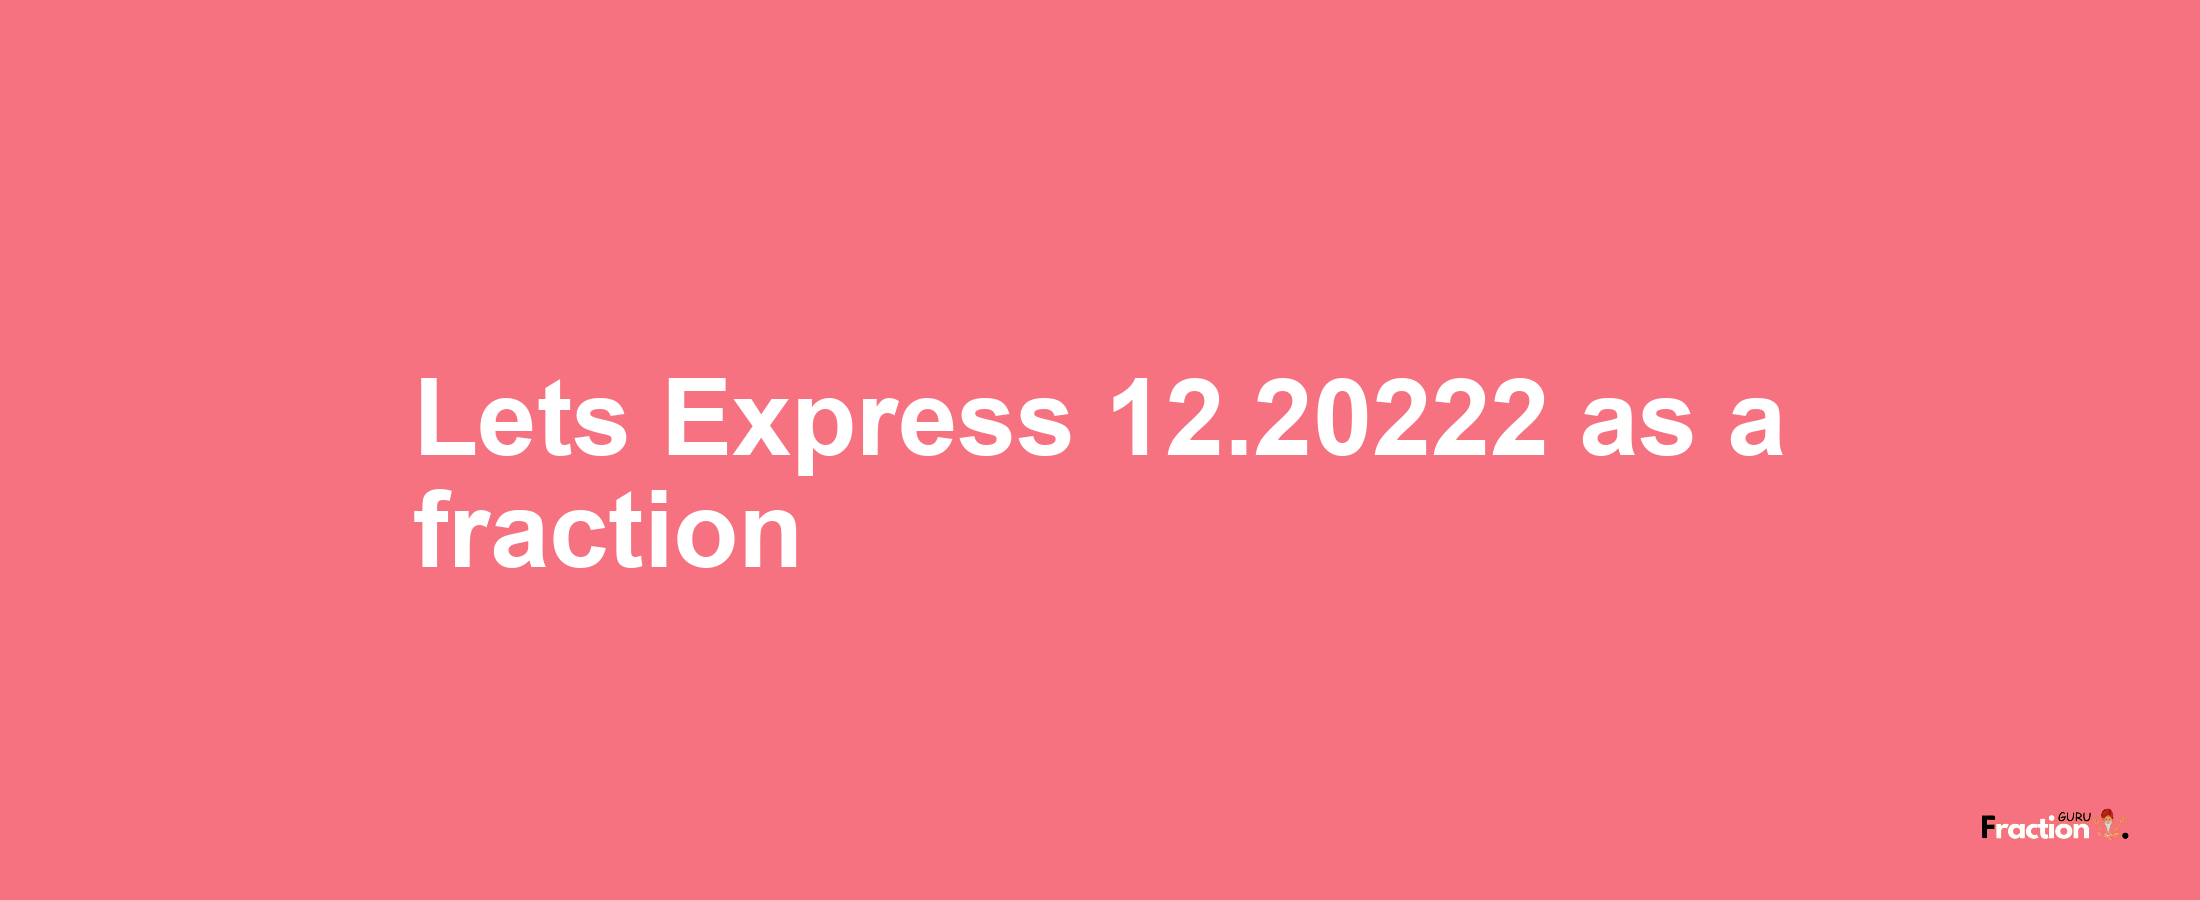 Lets Express 12.20222 as afraction